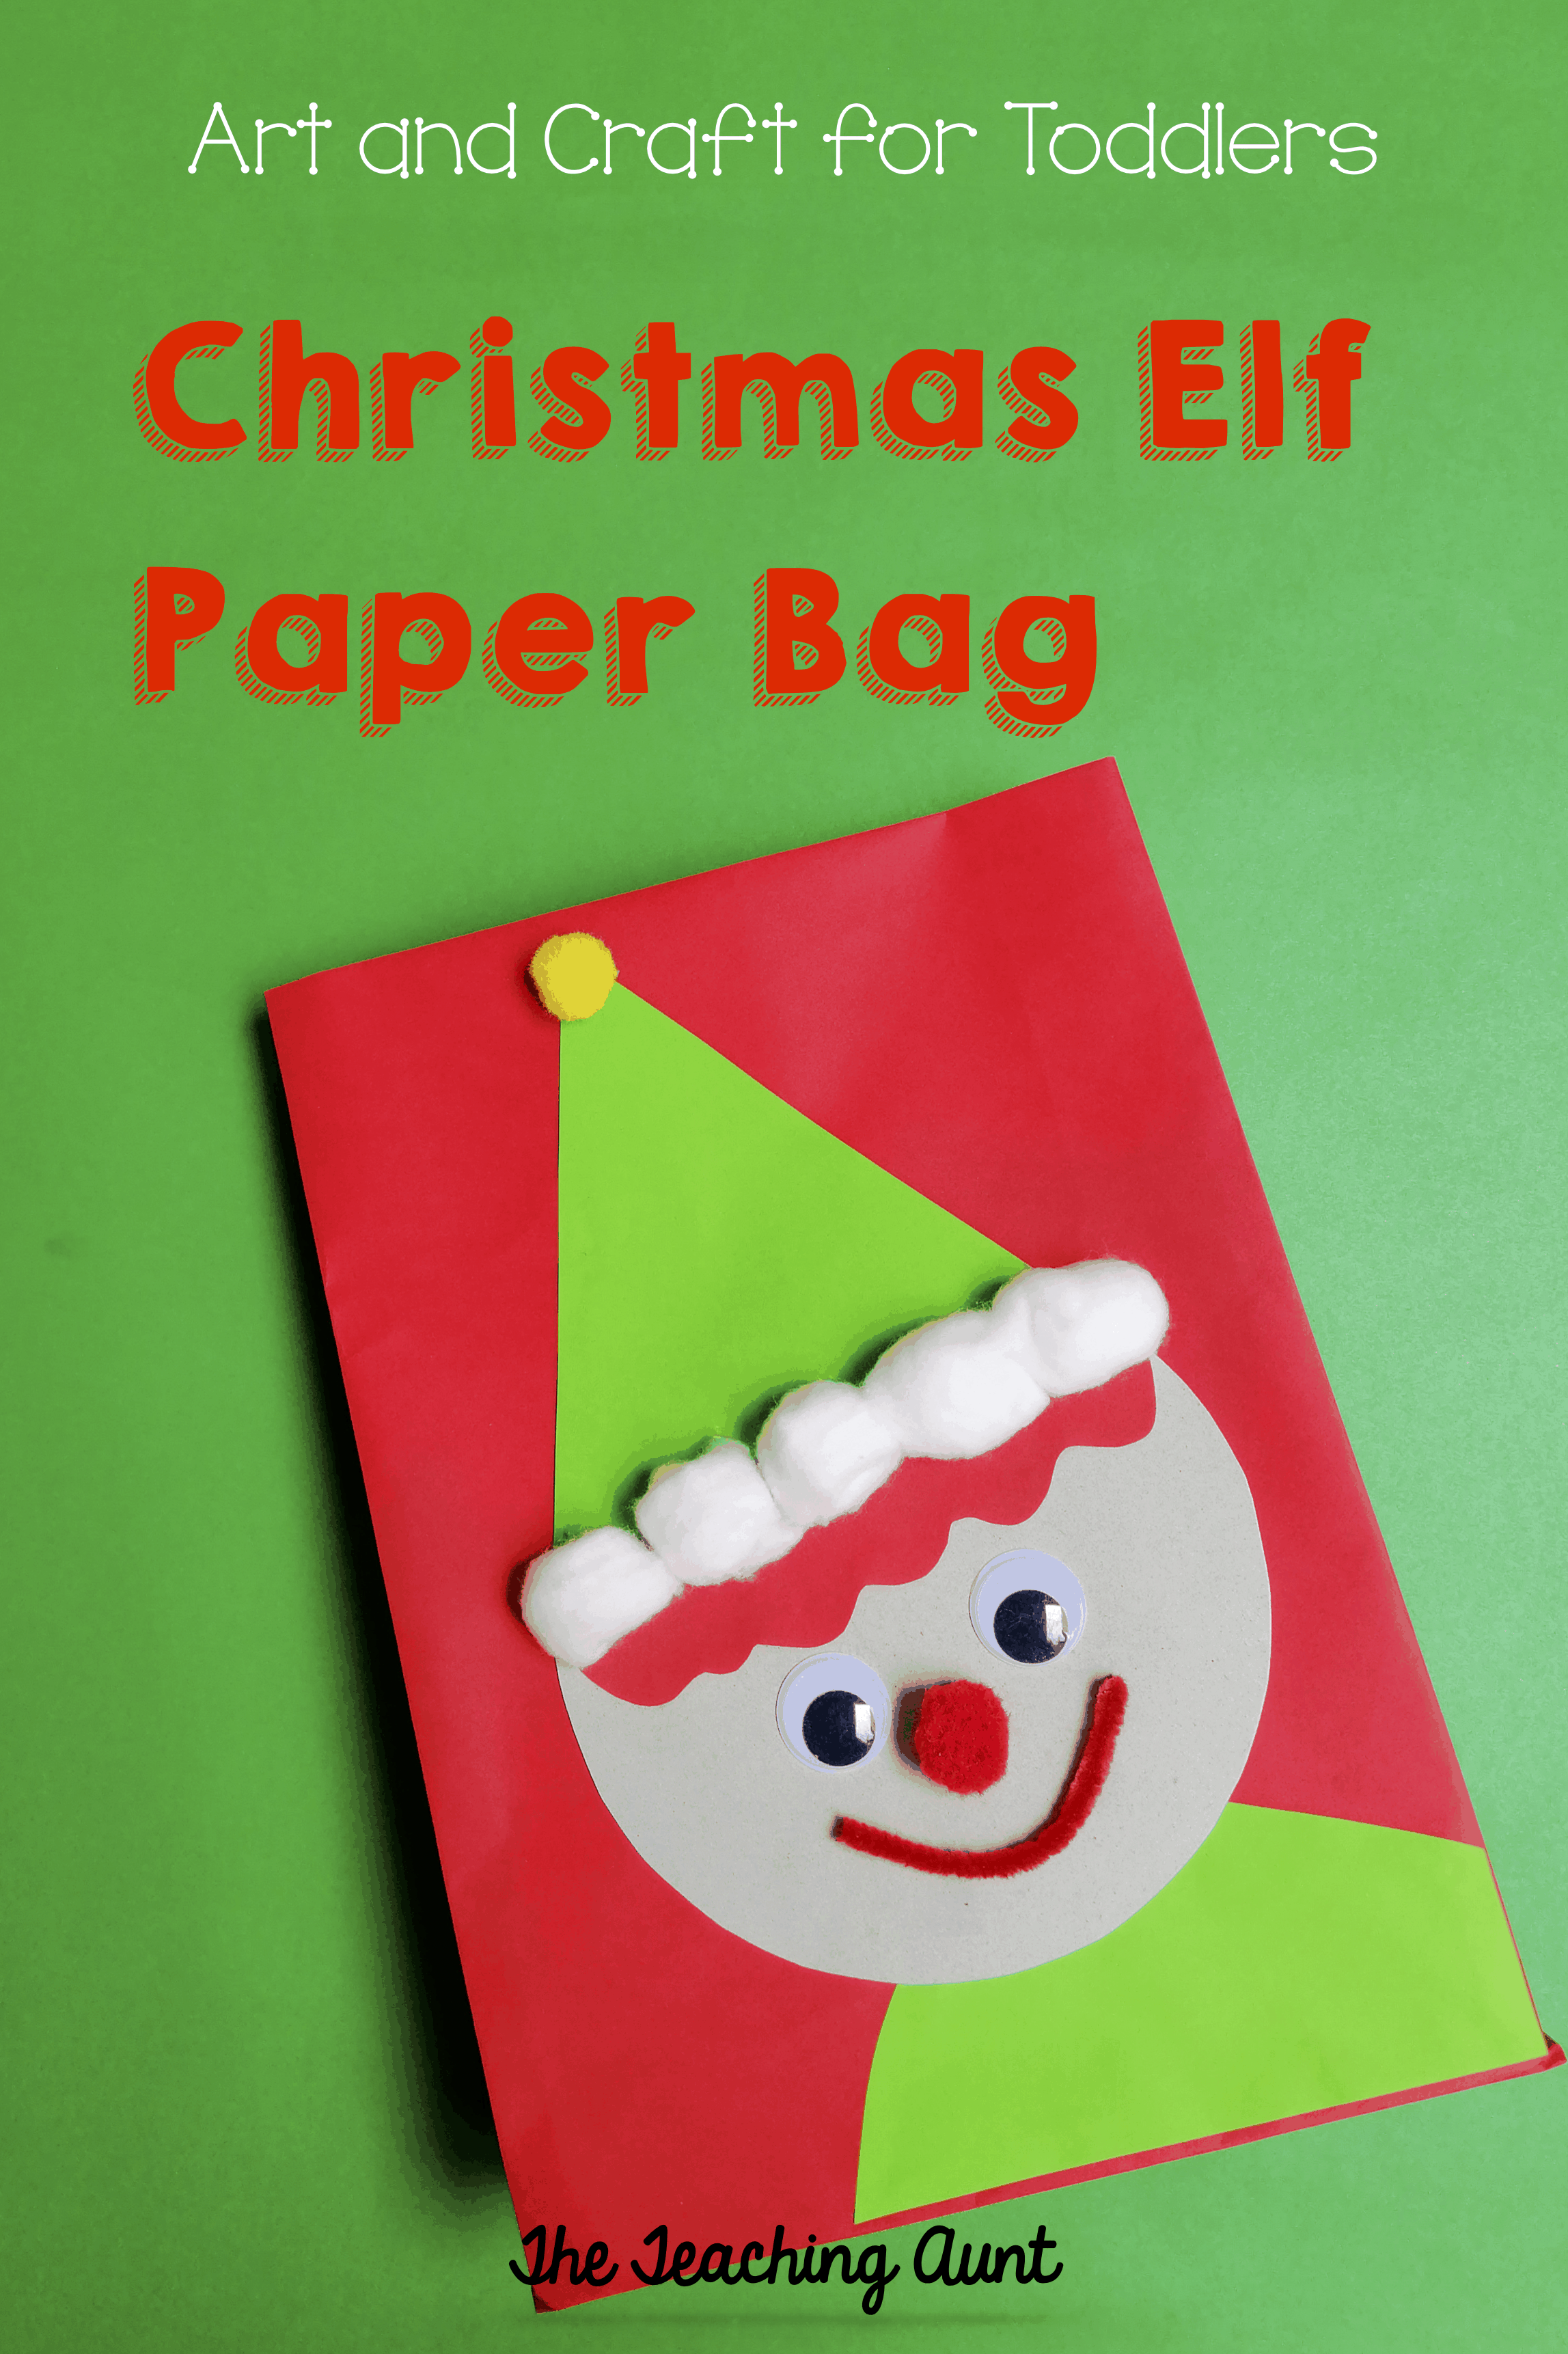 Christmas Elf Paper Bag Art and Craft for Toddlers